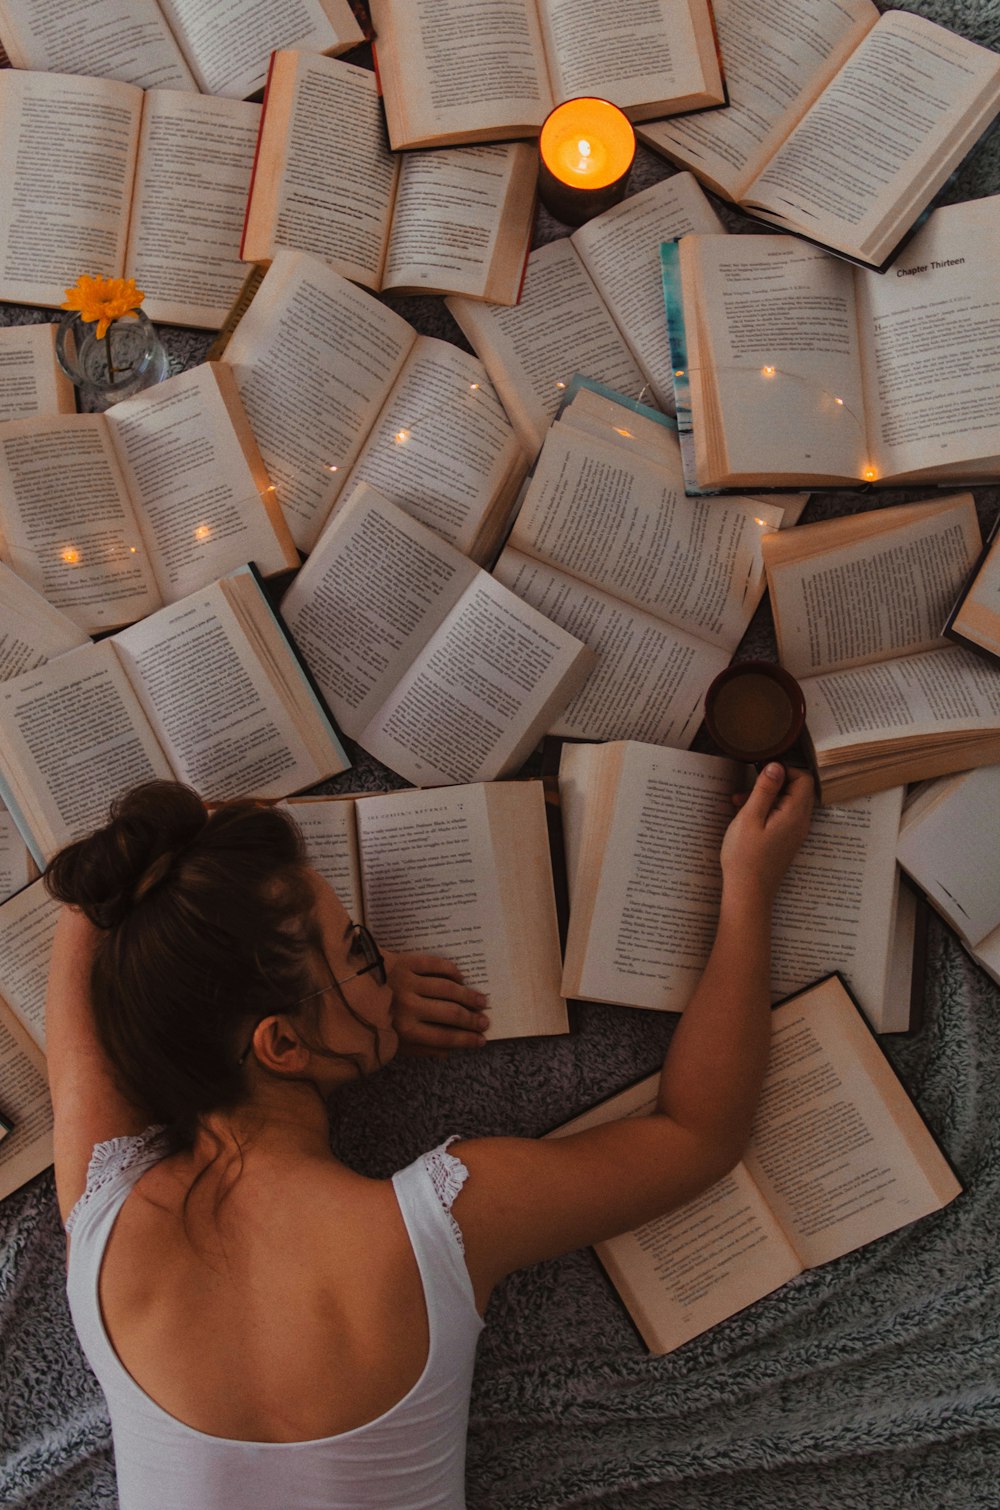 750+ Reading Book Pictures [HD] | Download Free Images on Unsplash